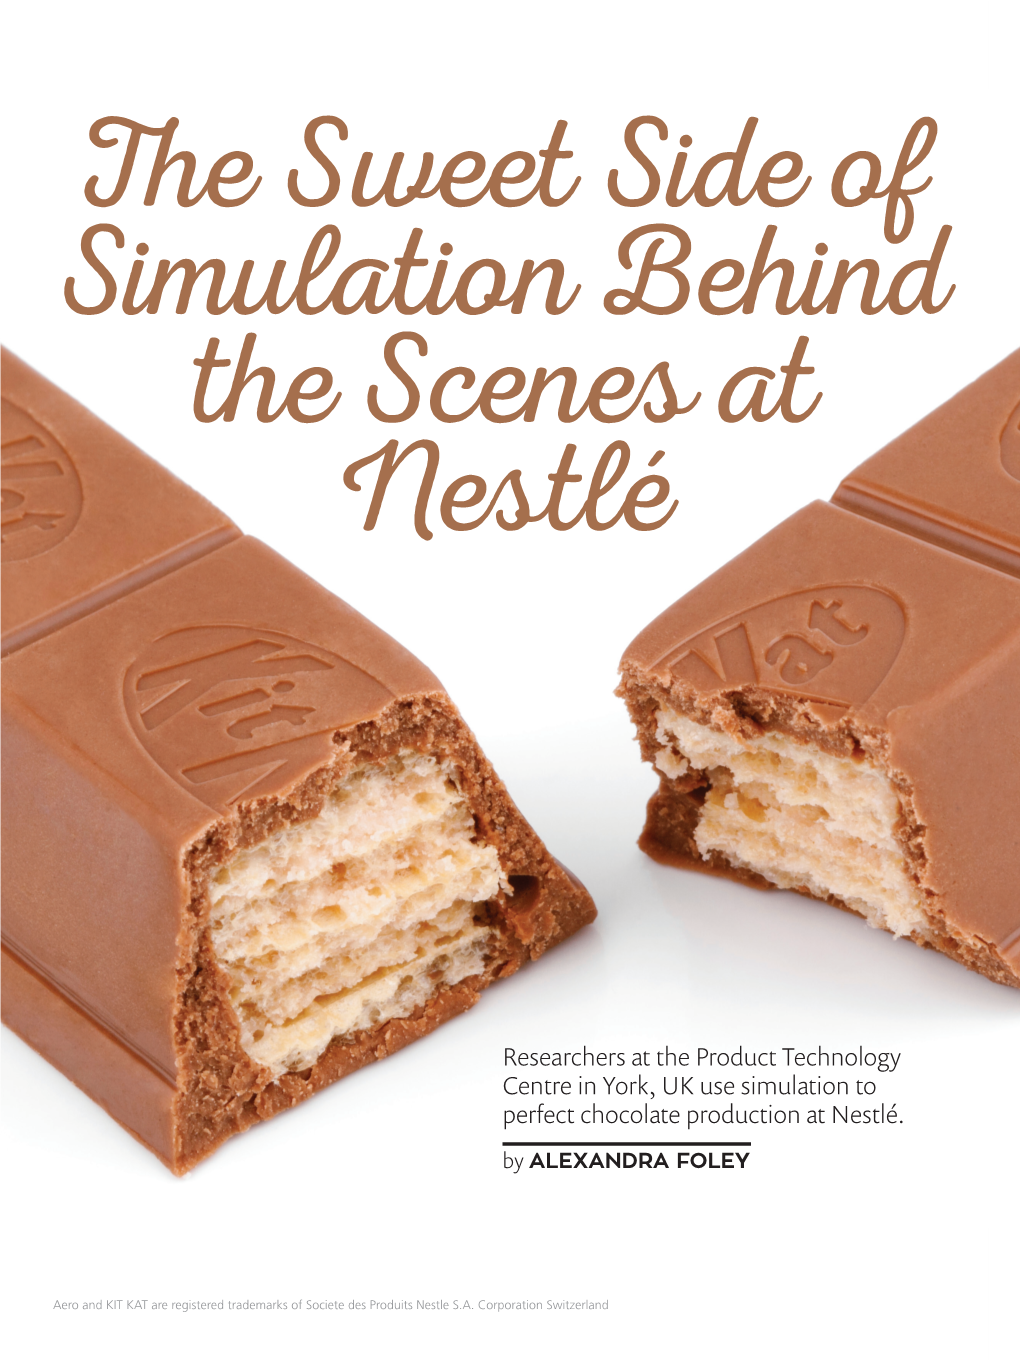 Researchers at the Product Technology Centre in York, UK Use Simulation to Perfect Chocolate Production at Nestlé